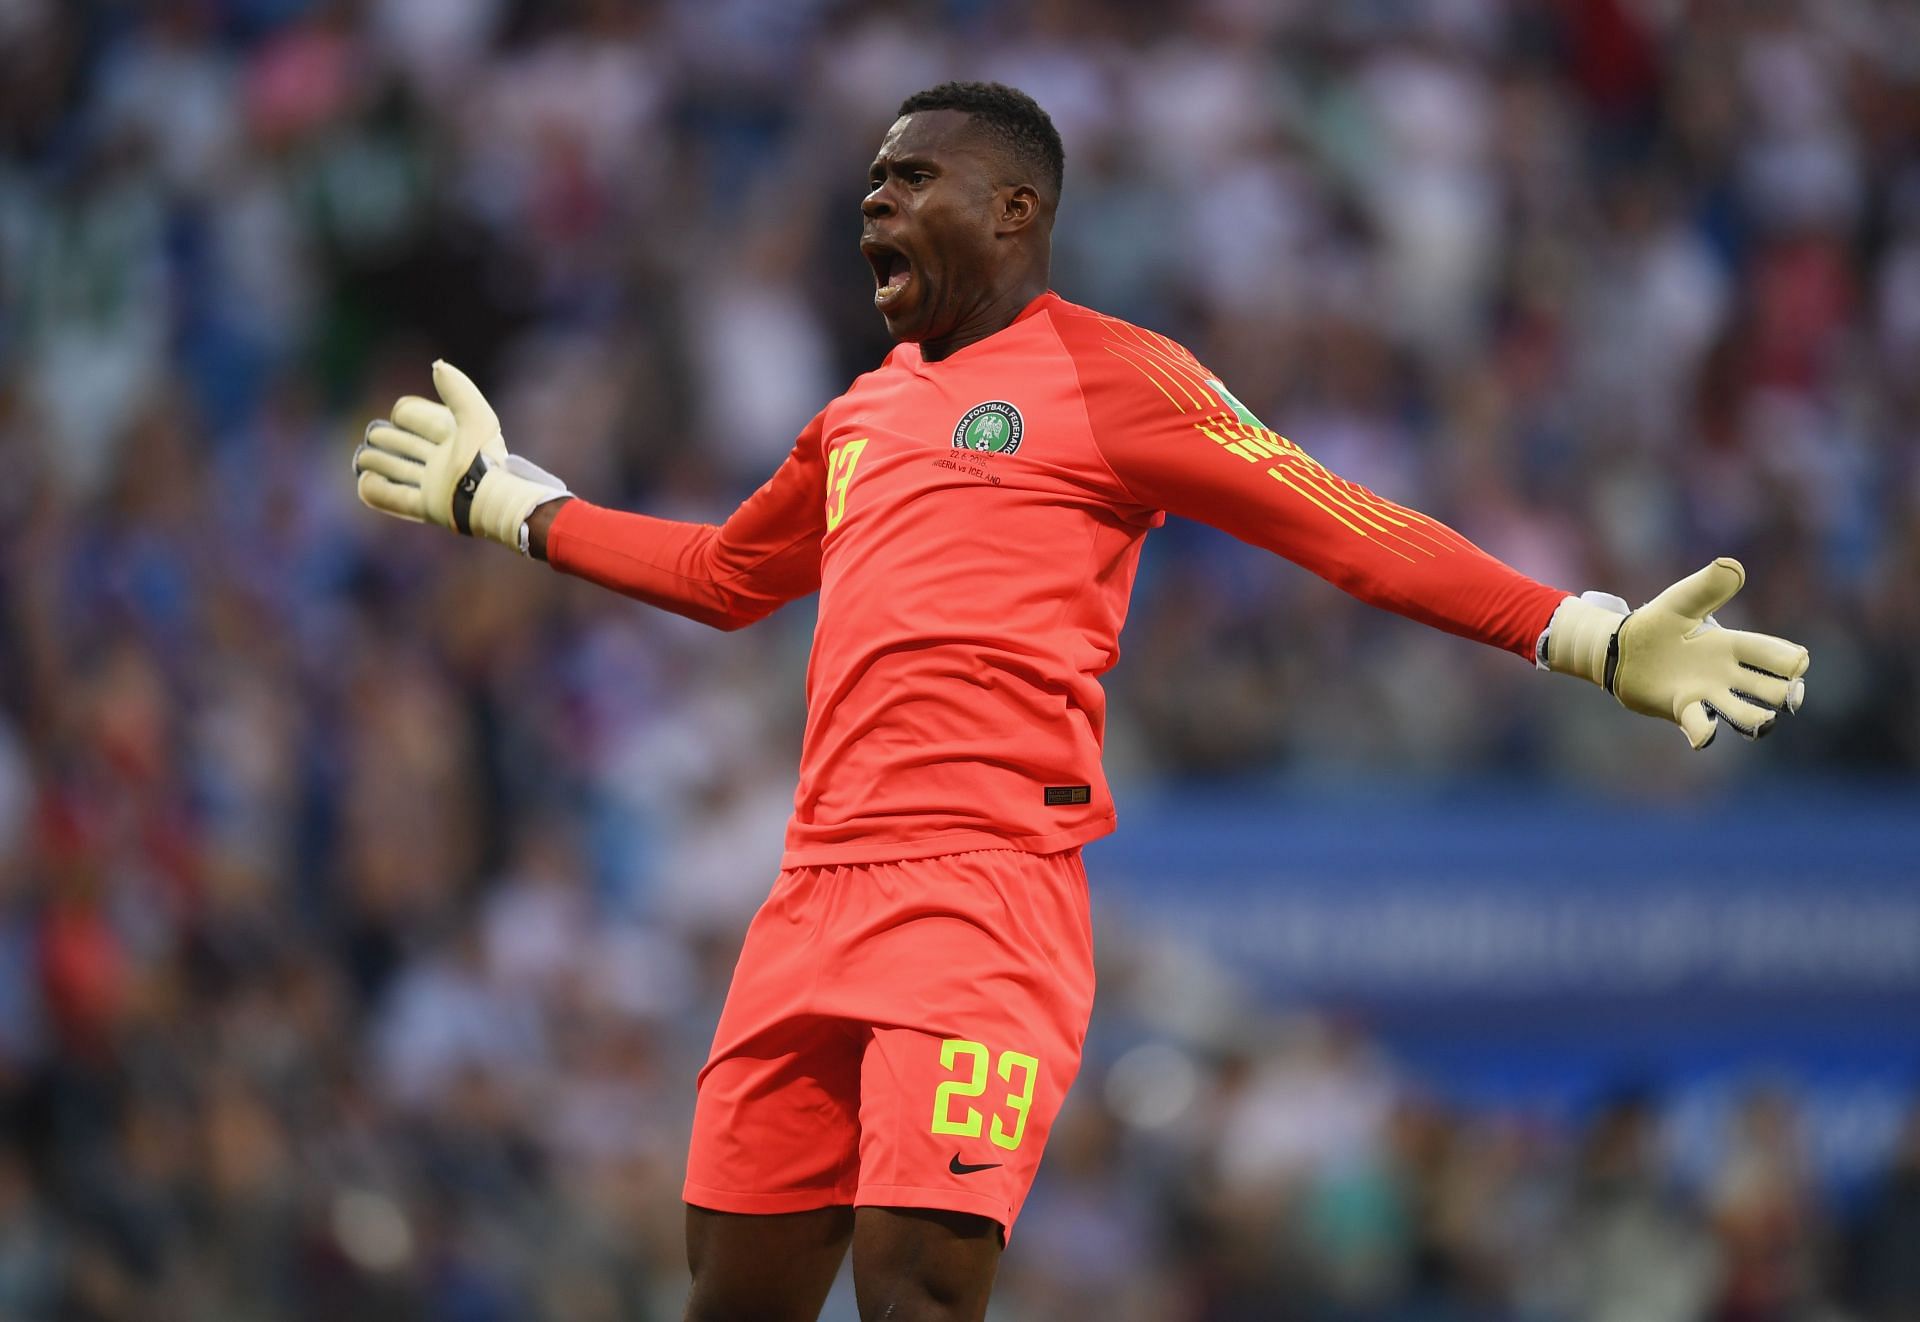 Francis Uzoho was in majestic form between the sticks against Manchester United.